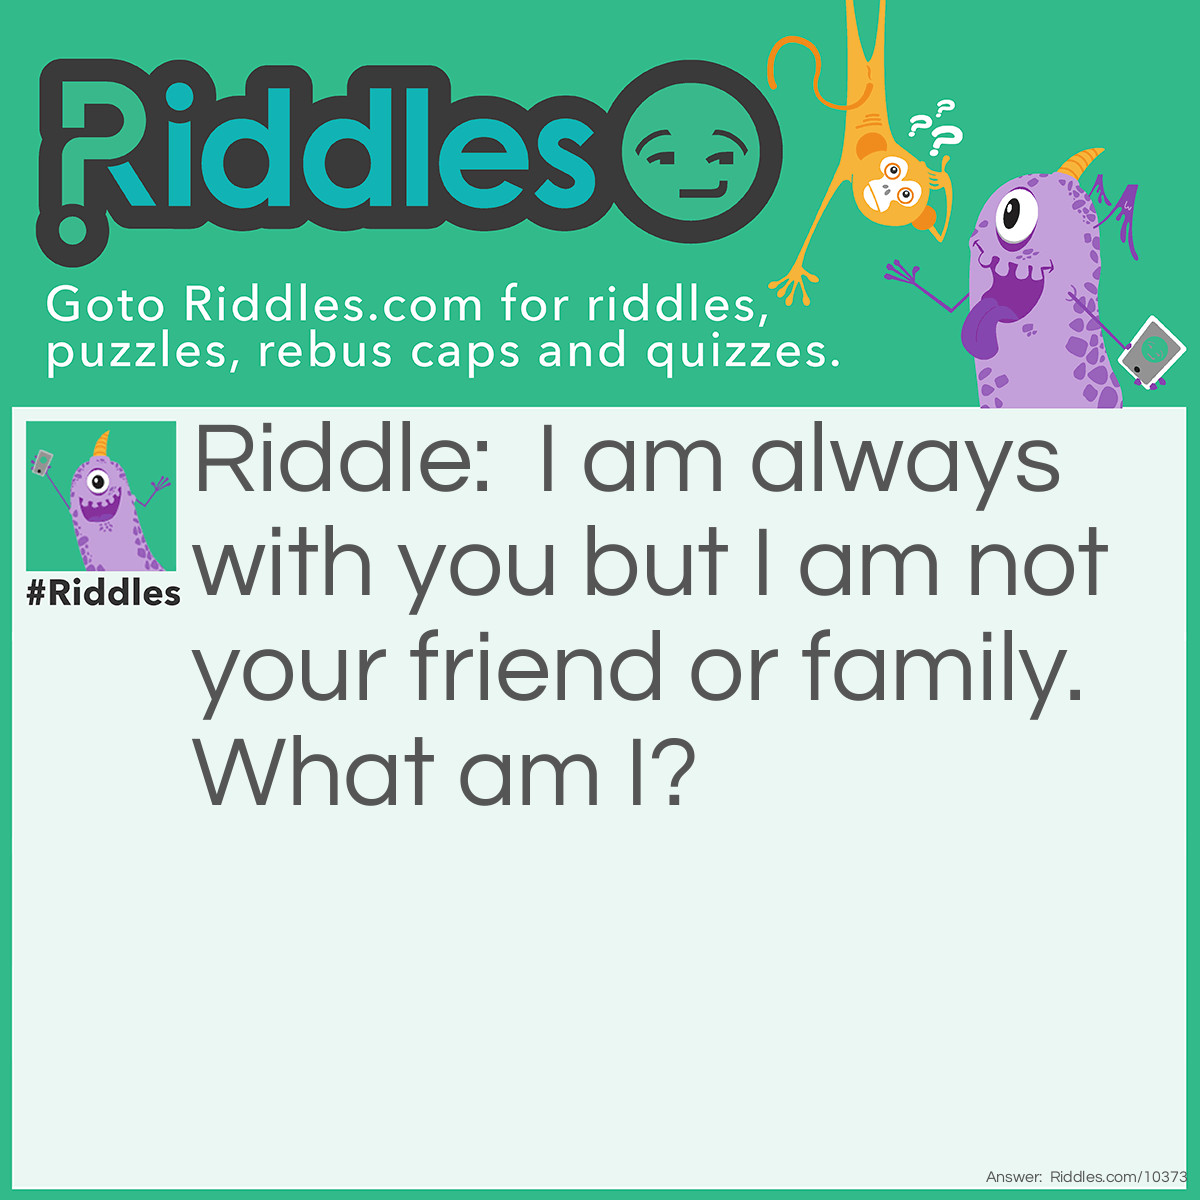 Riddle: I am always with you but I am not your friend or family. What am I? Answer: Shadow.